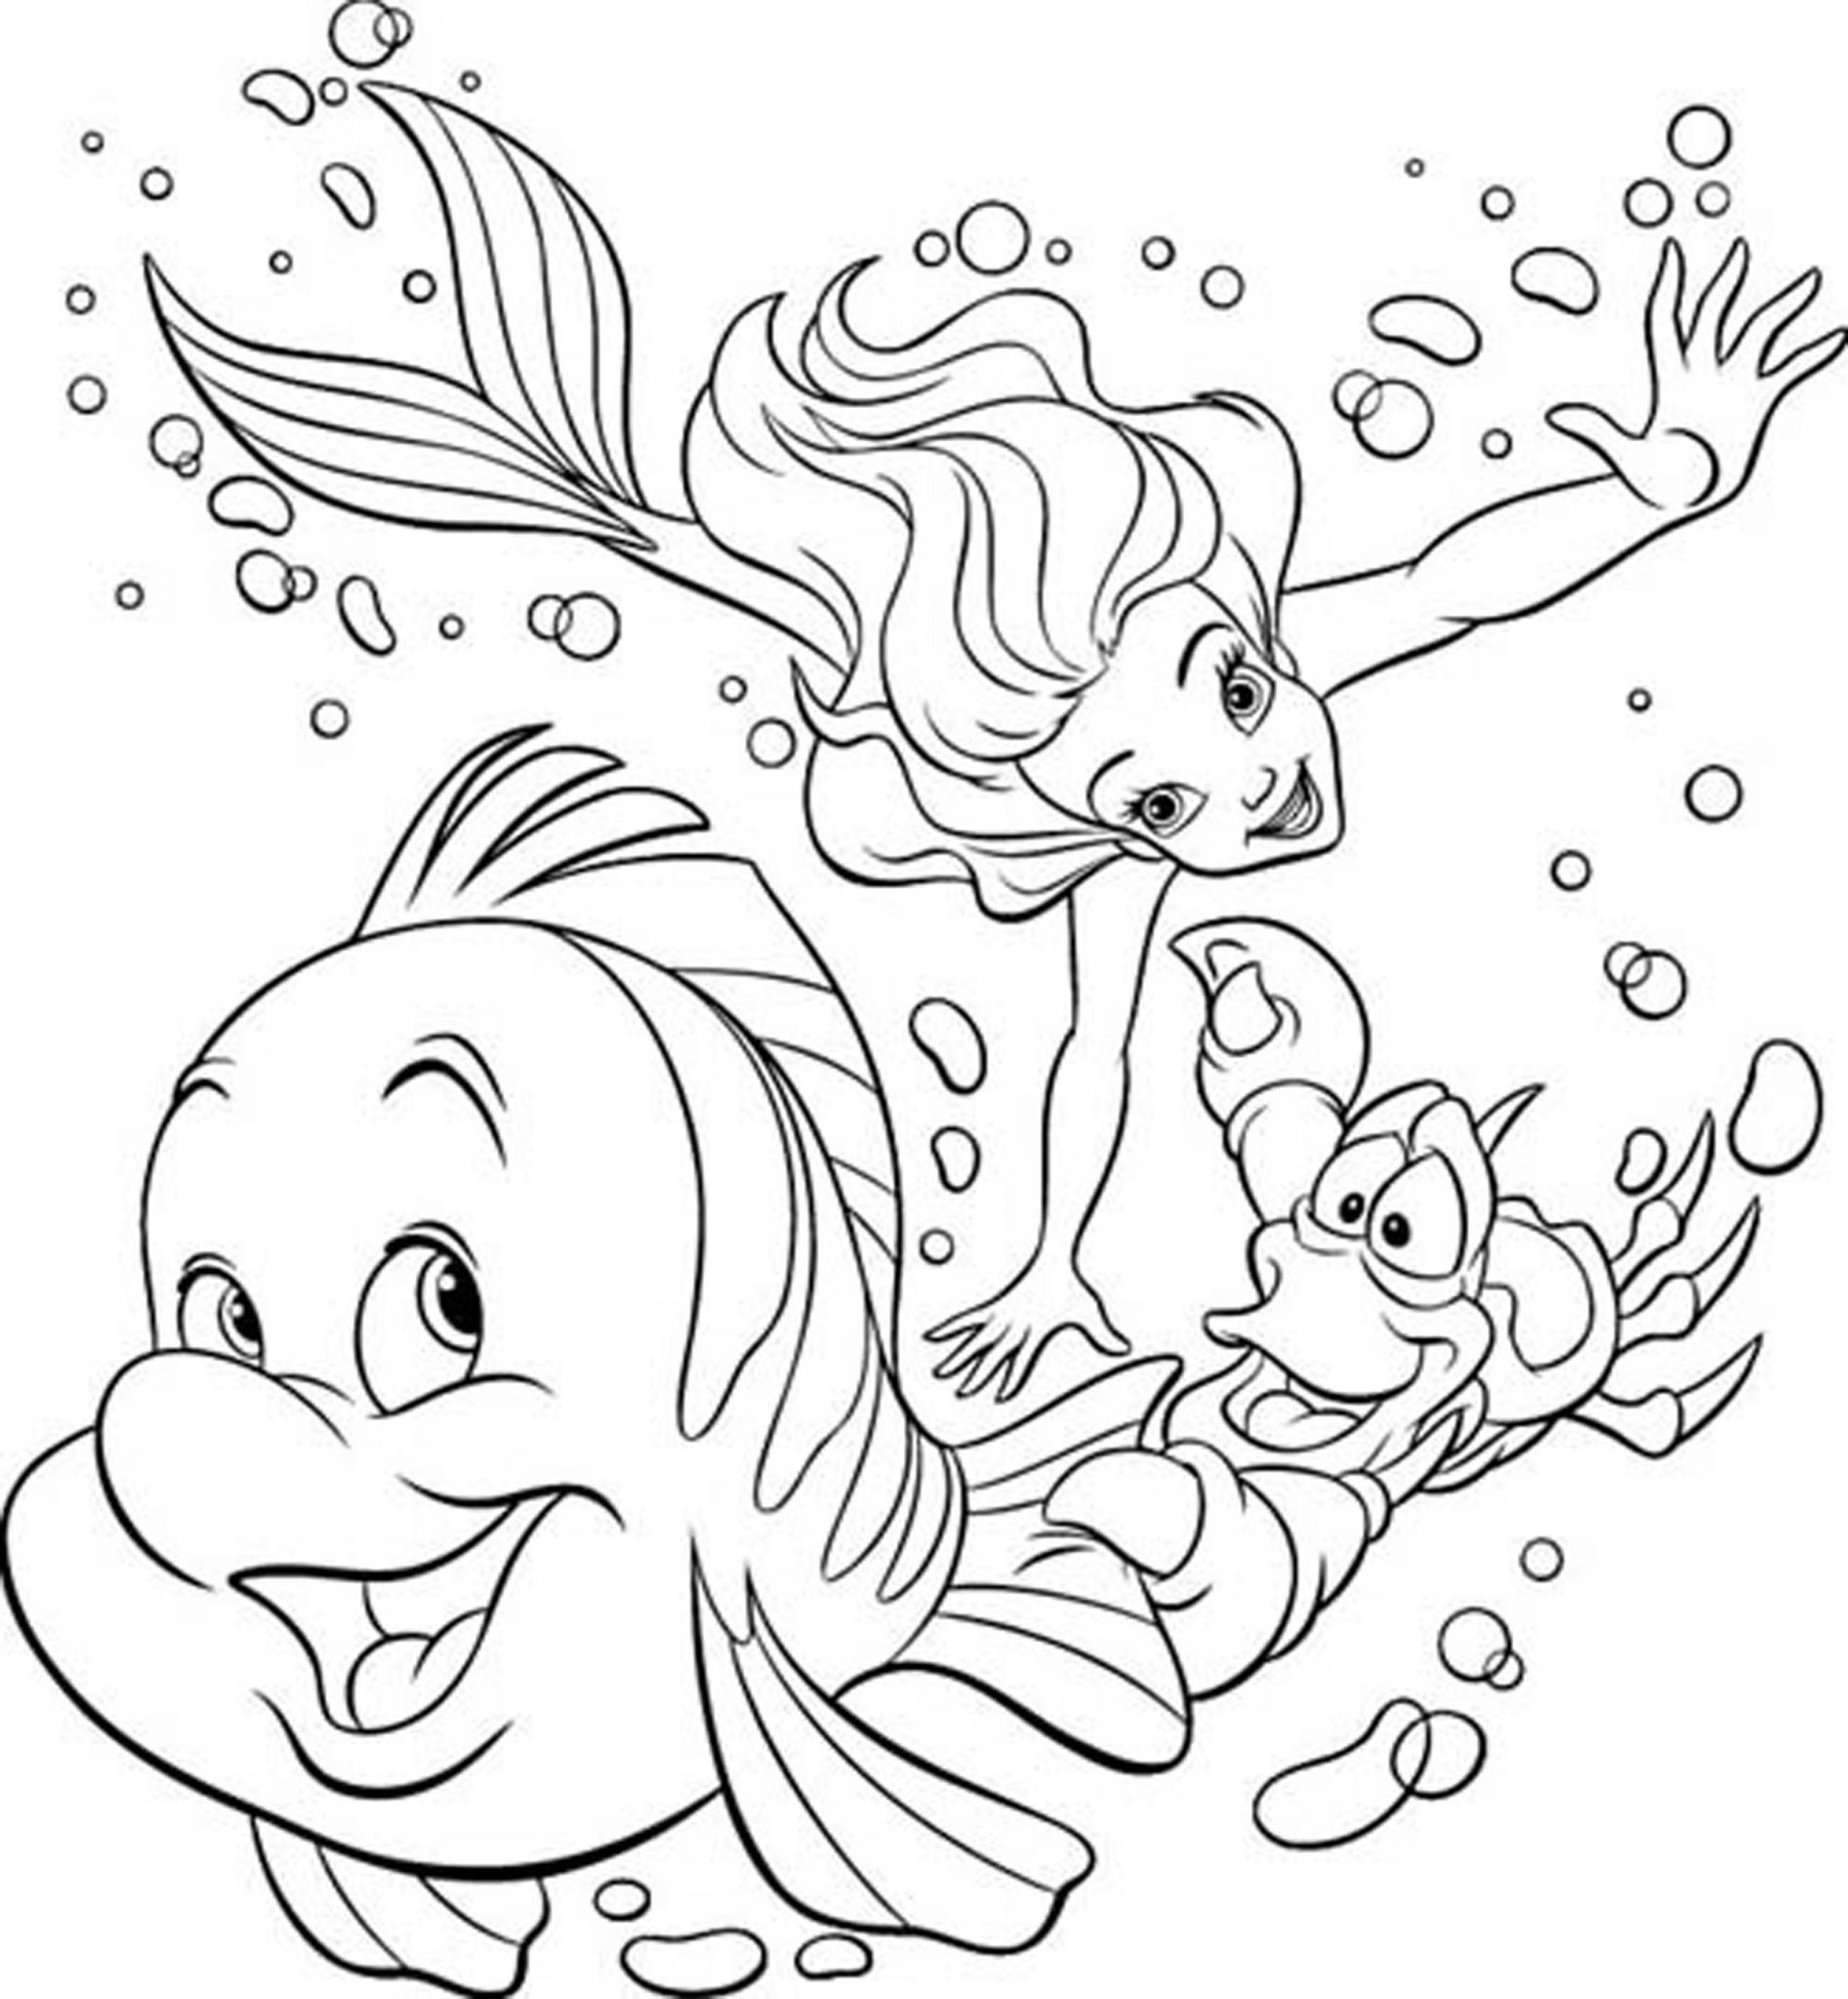 Print & Download   Princess Coloring Pages, Support The Child's ...